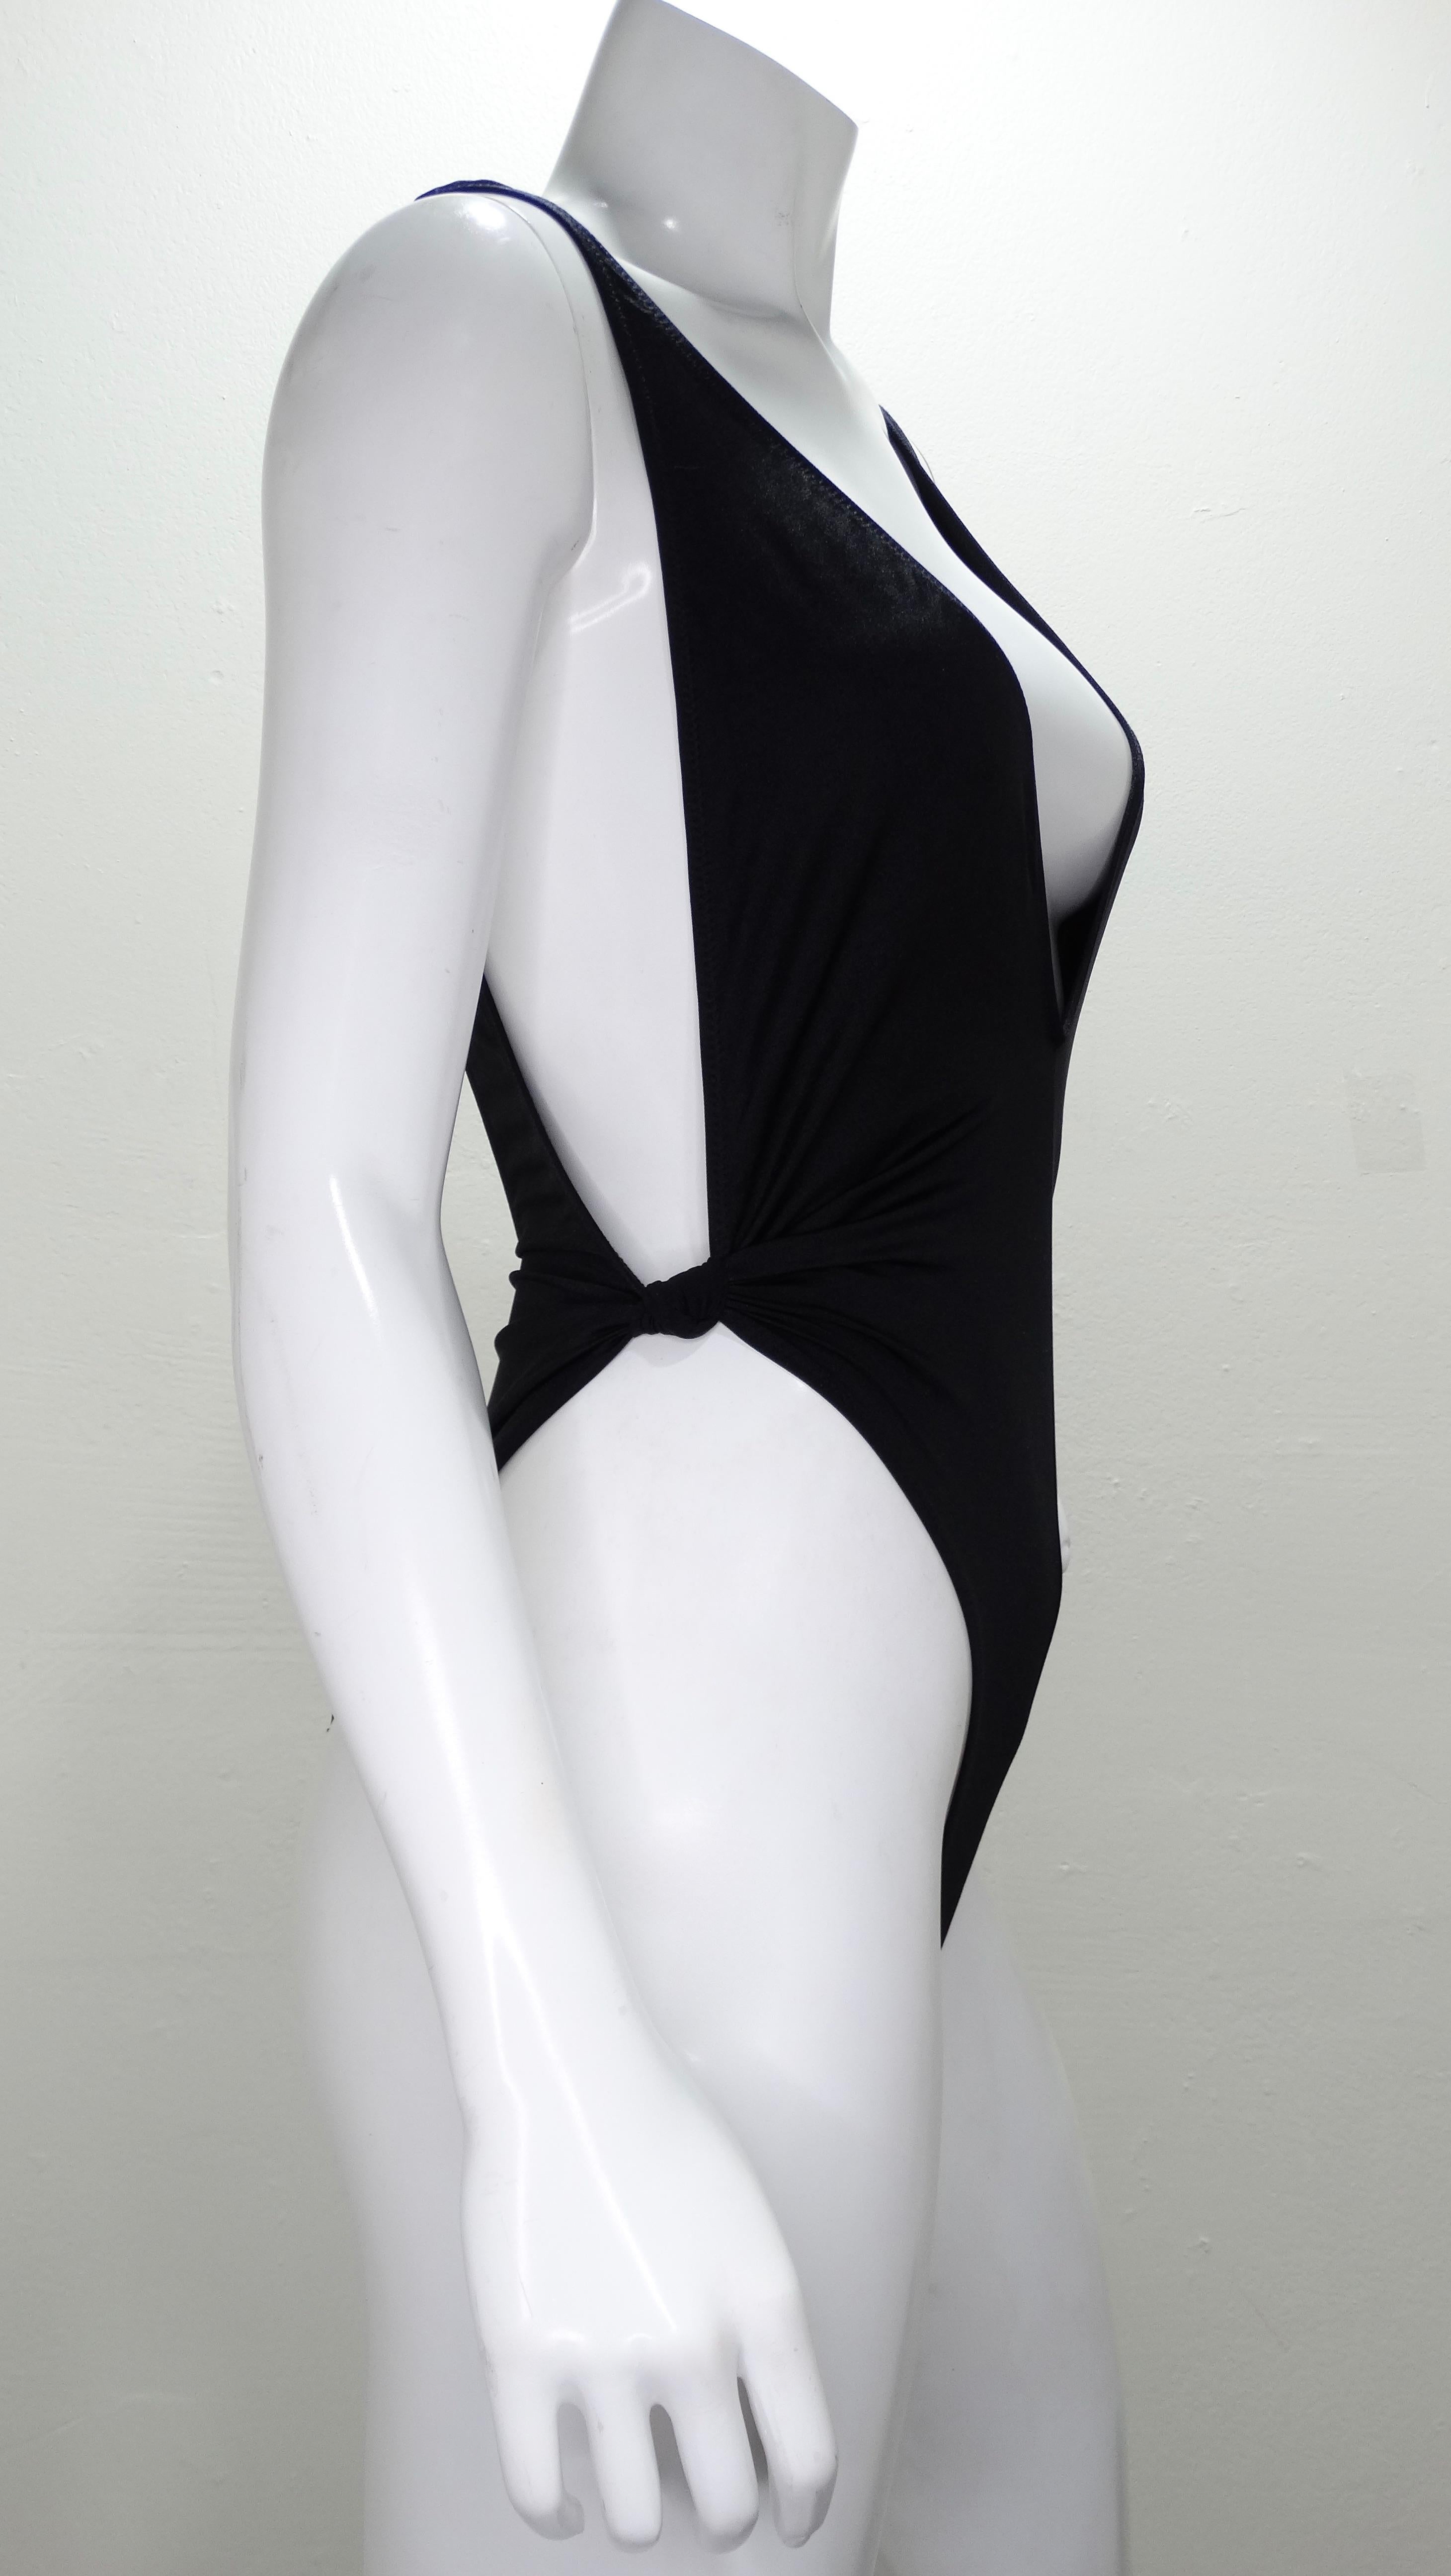 Be beach ready at all times with this Gideon Oberson one piece swimsuit! Circa 1990s, this sexy one piece features a ruched knotted waist with a deep v cut in the front and back. Perfect for the pool or the beach, this swimsuit will pair perfectly